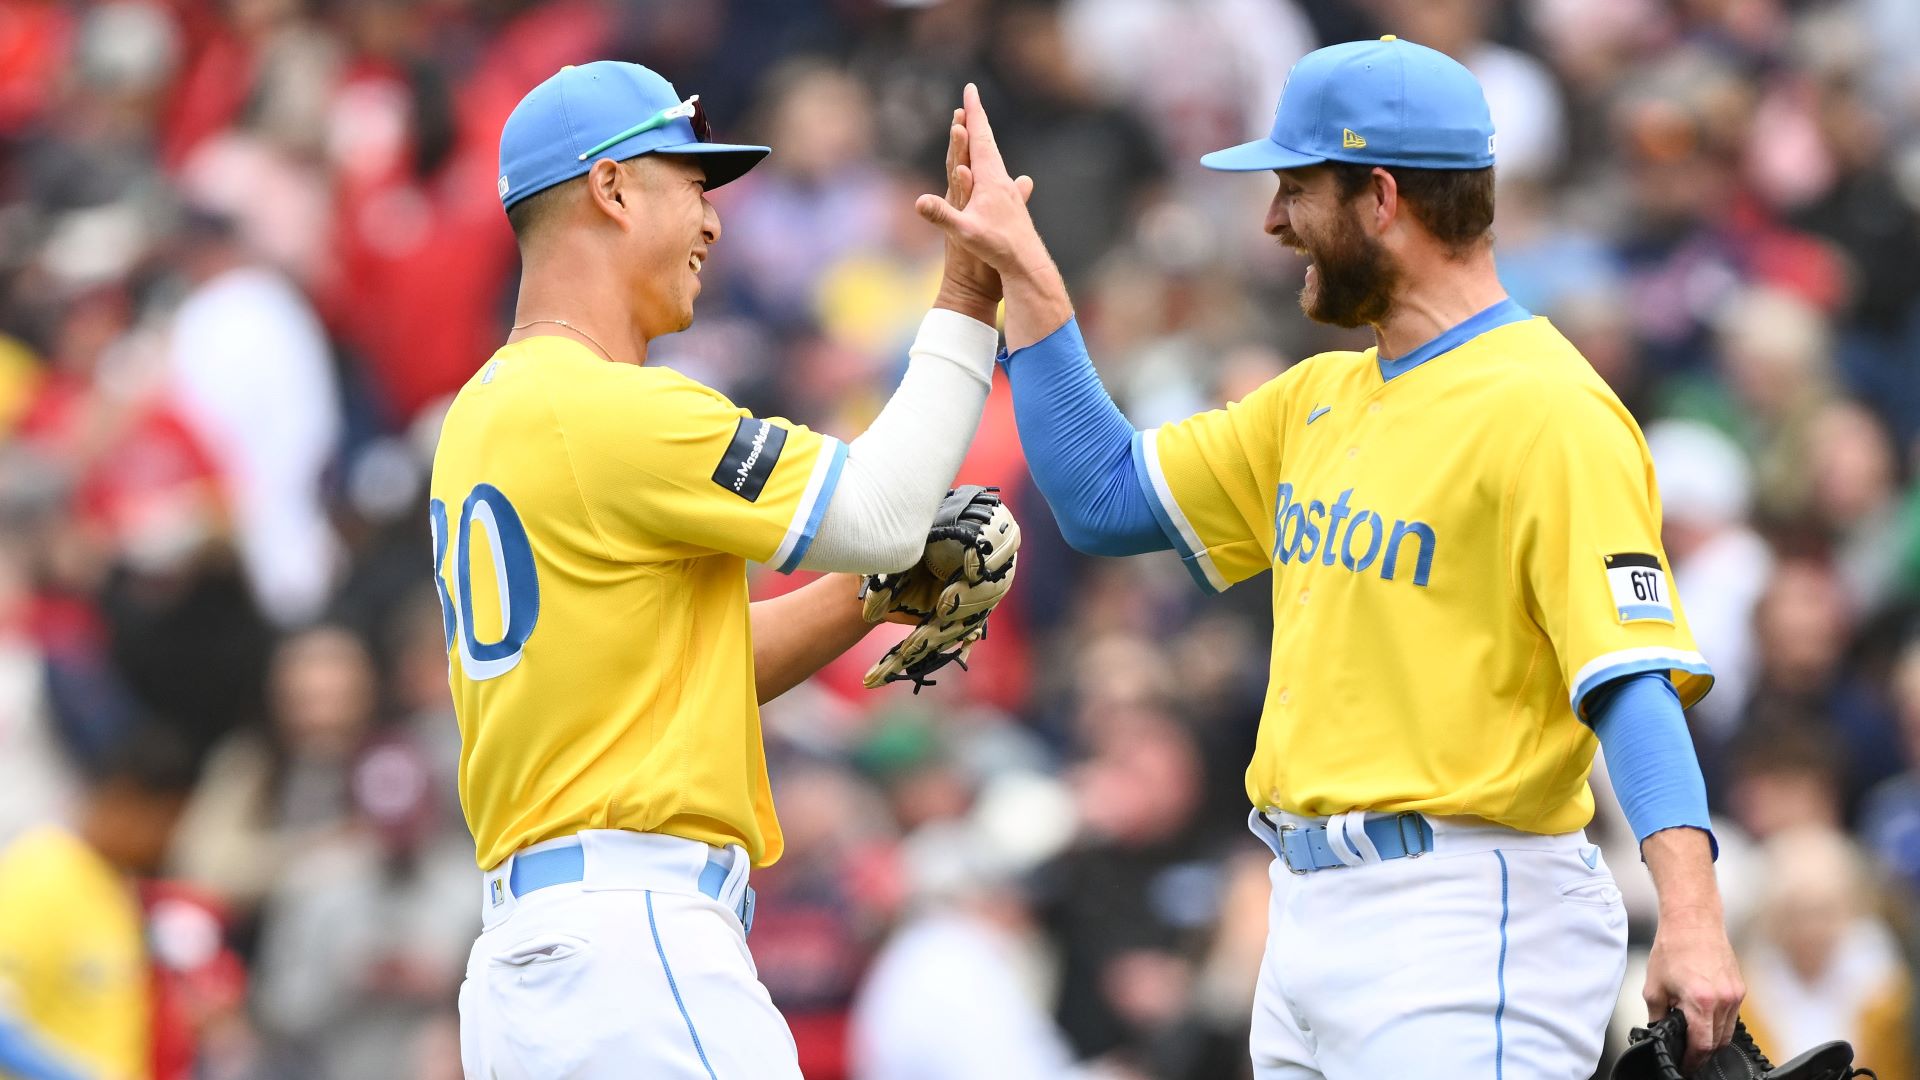 Why Are the Red Sox Wearing Yellow and Blue? New Uniforms Explained